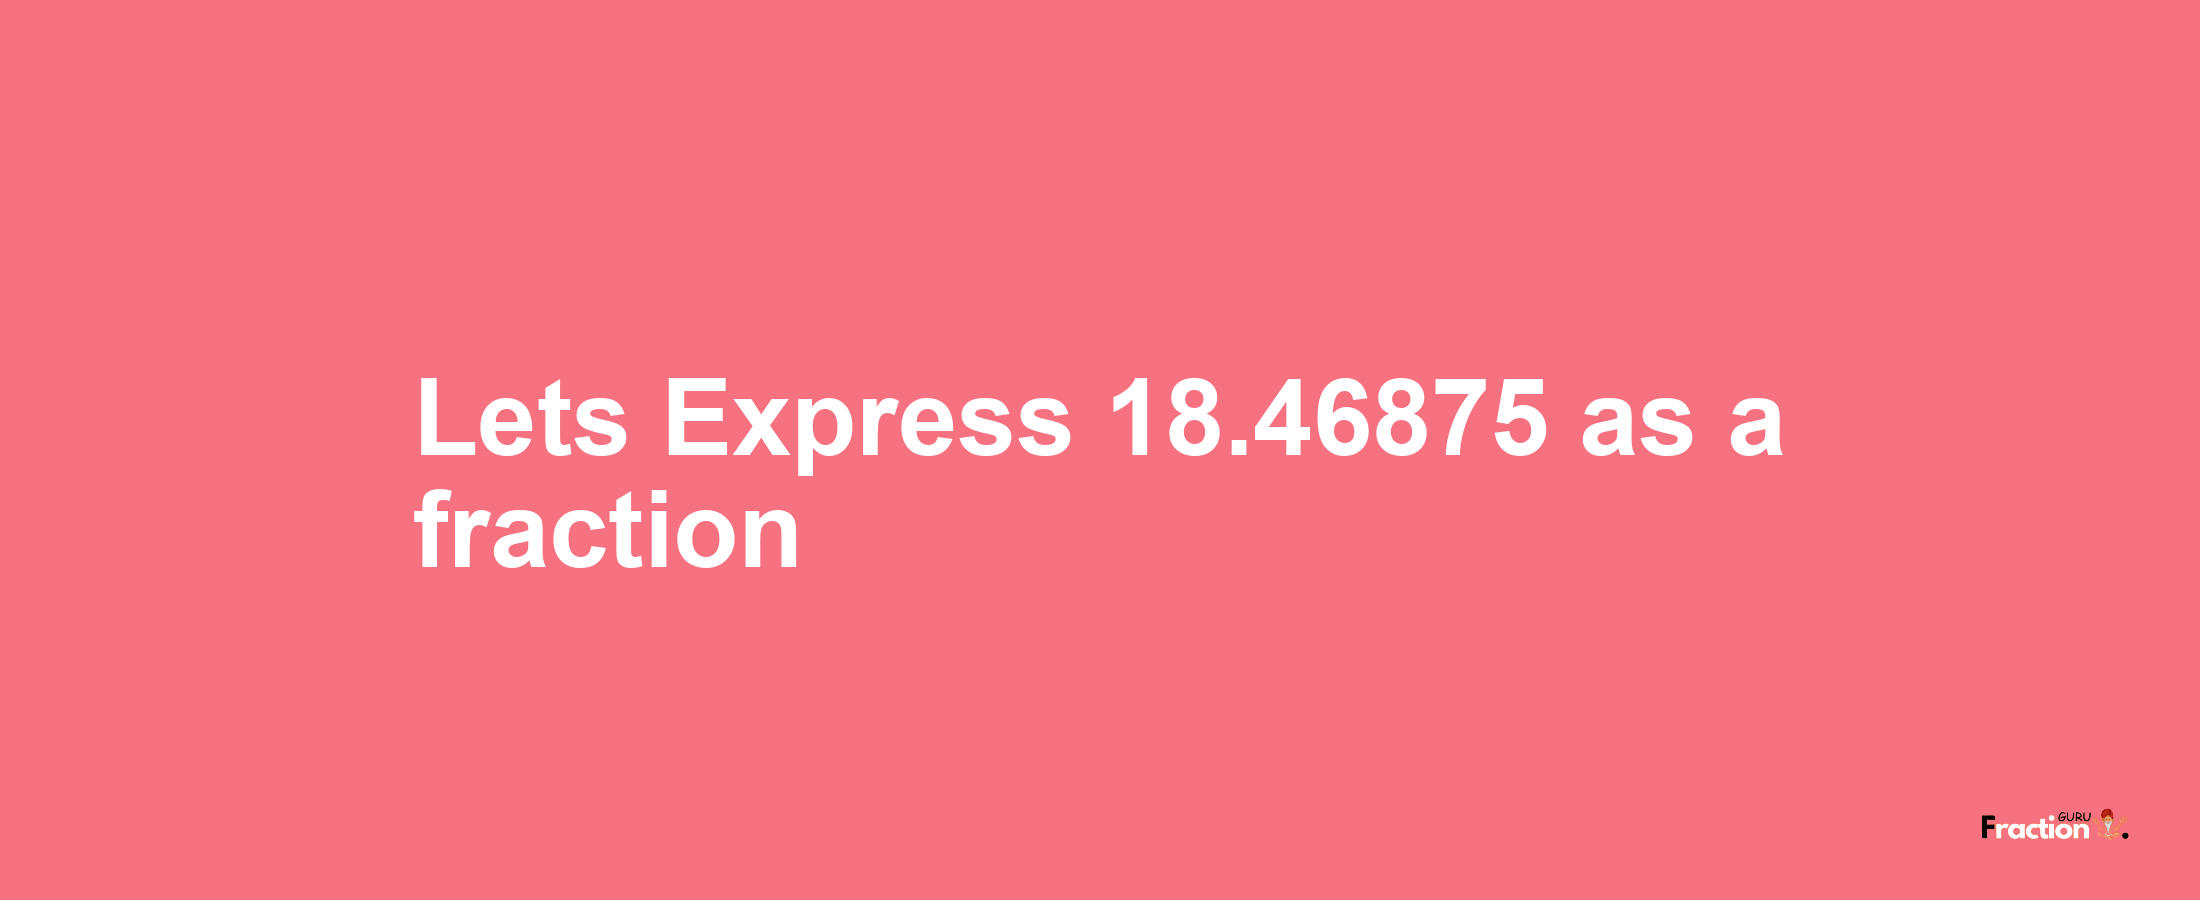 Lets Express 18.46875 as afraction